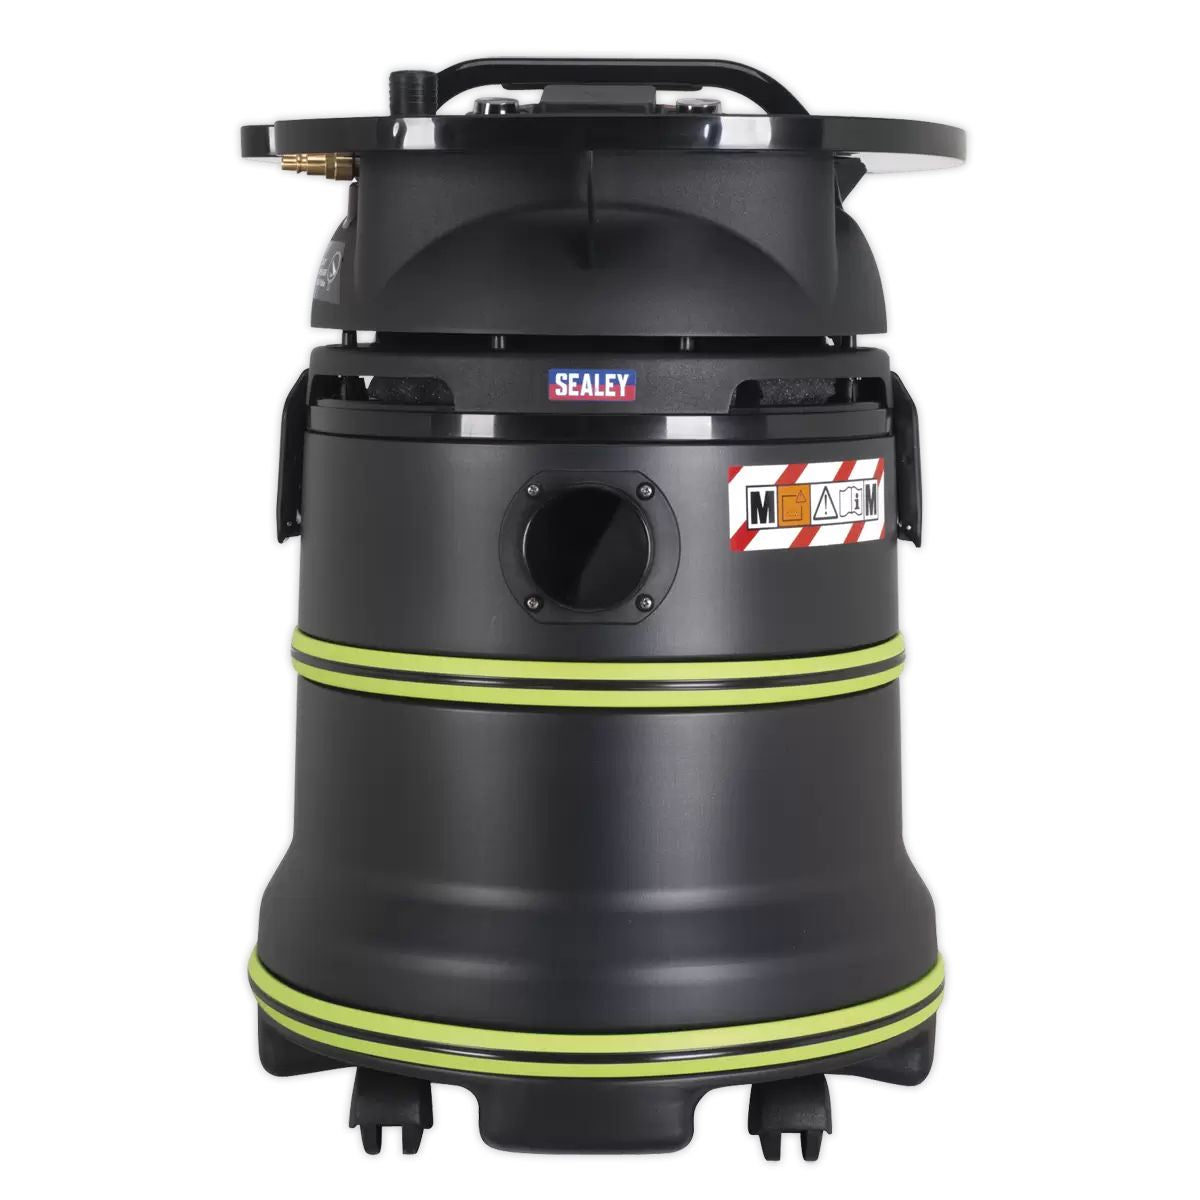 Sealey DFS35M 35L Wet & Dry Industrial Vacuum Cleaner 230V/2000W